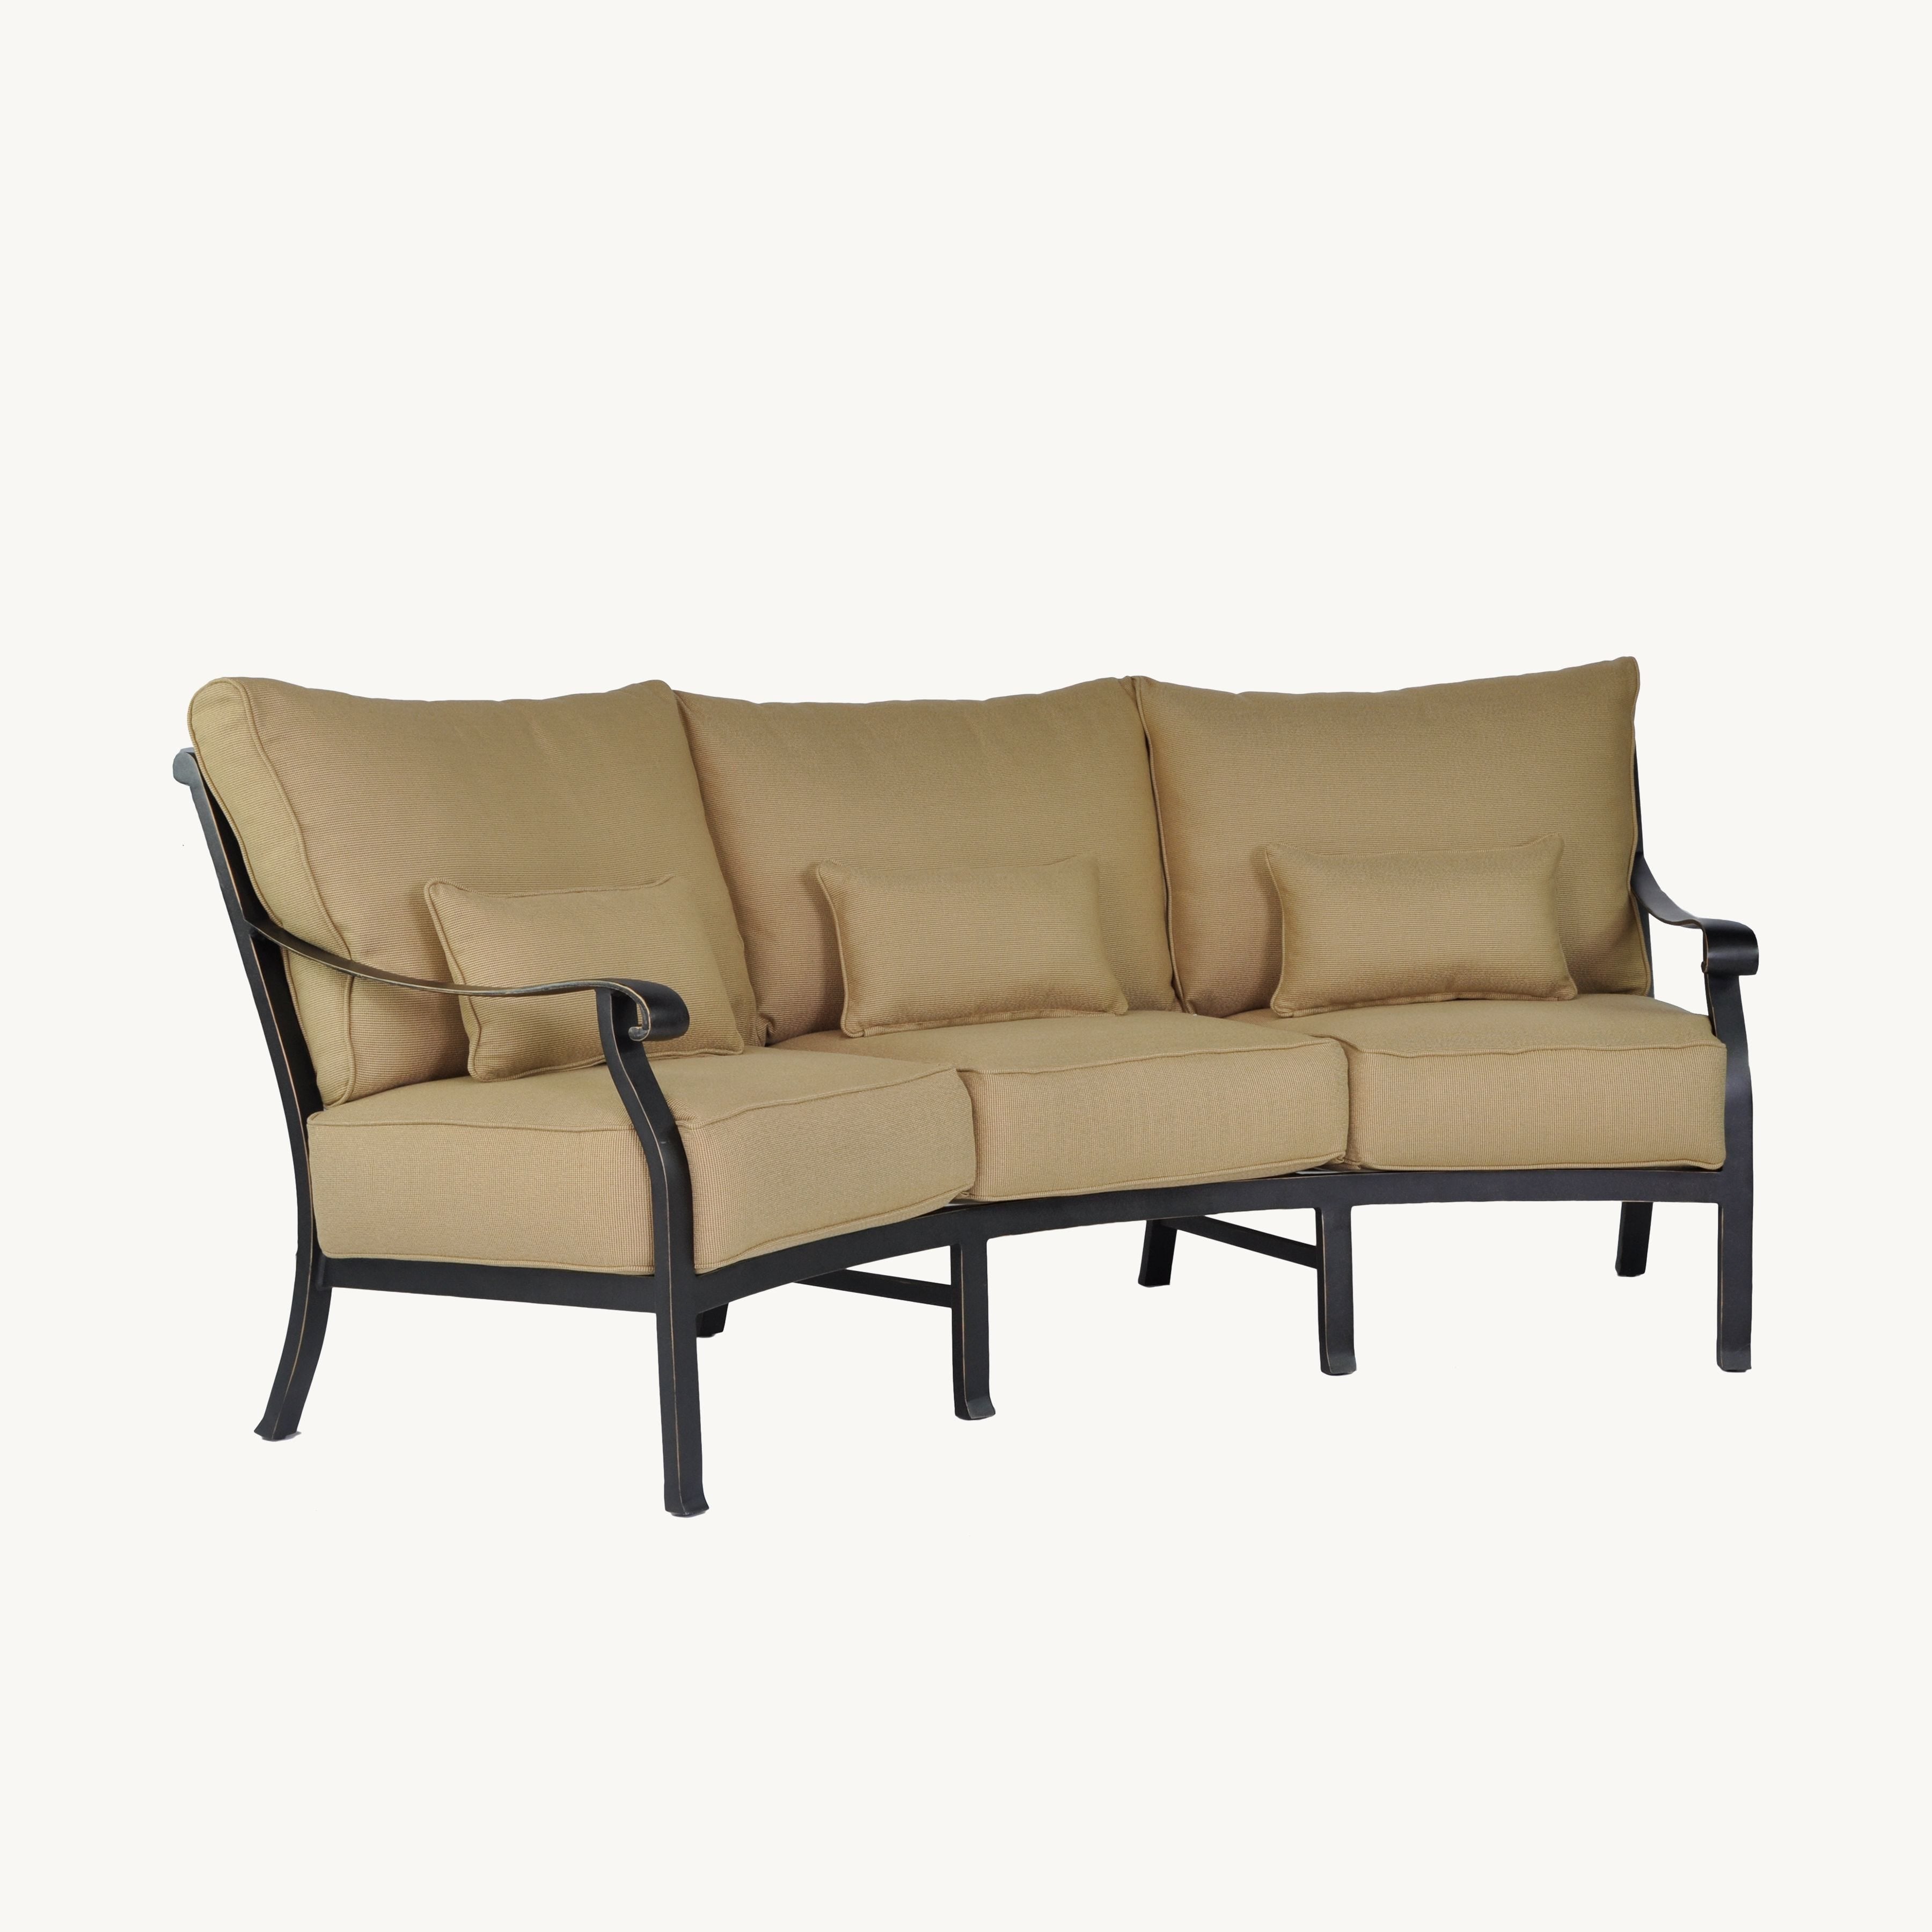 Madrid Cushioned Crescent Sofa By Castelle